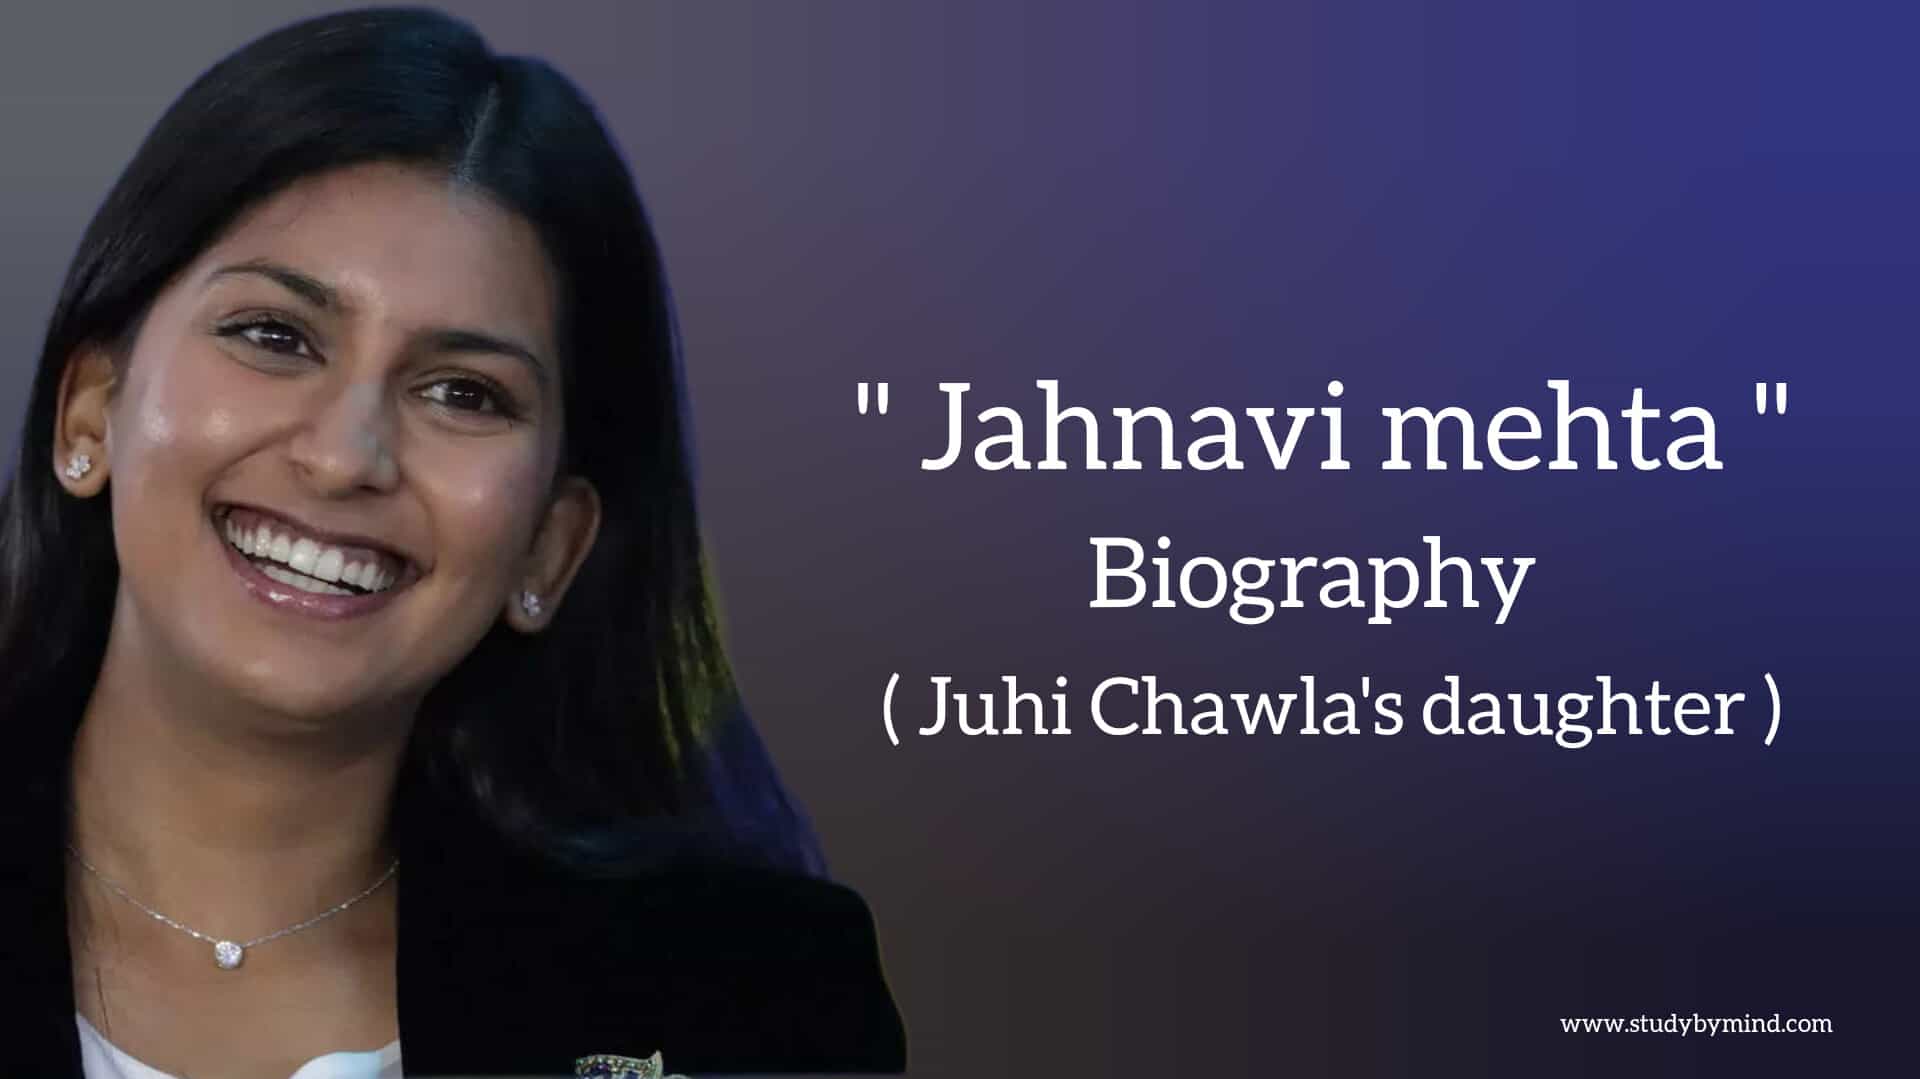 You are currently viewing Jahnavi mehta biography in english (Daughter of Juhi Chawla)